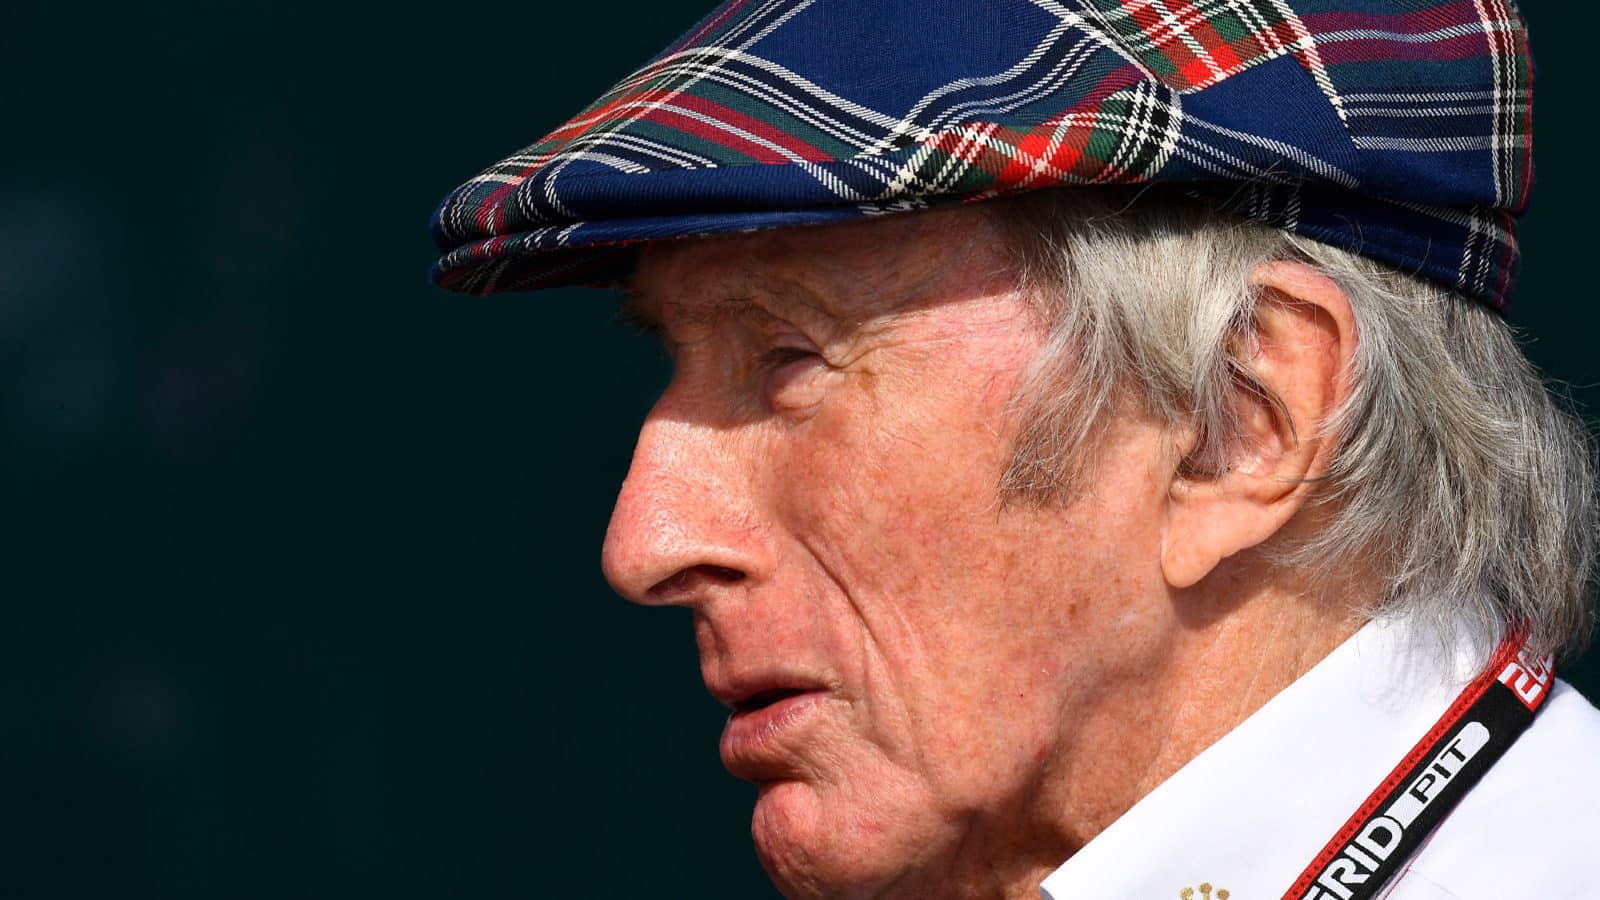 Jackie Stewart in the paddock during practice for the 2021 Mexico City Grand Prix. Photo: Grand Prix Photo